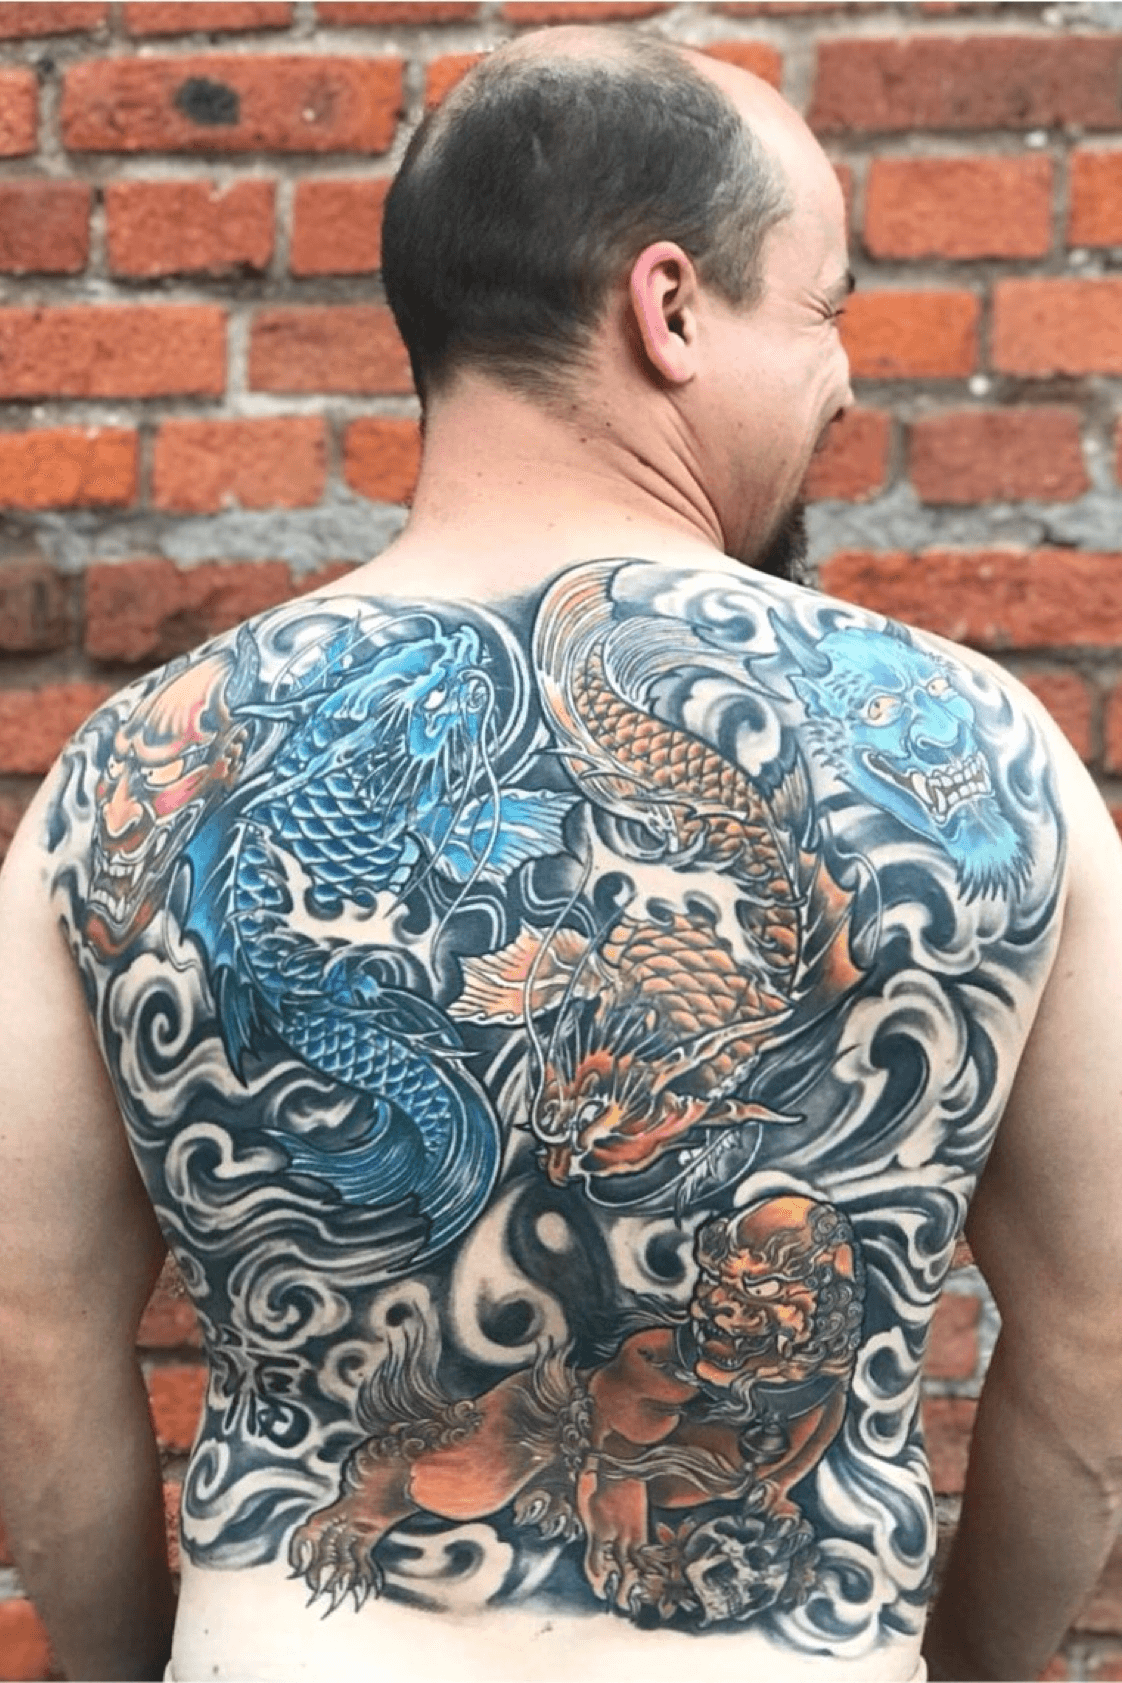 Buy Japanese Woman With Green Dragon Tattoo on Her Back Yakuza Online in  India  Etsy